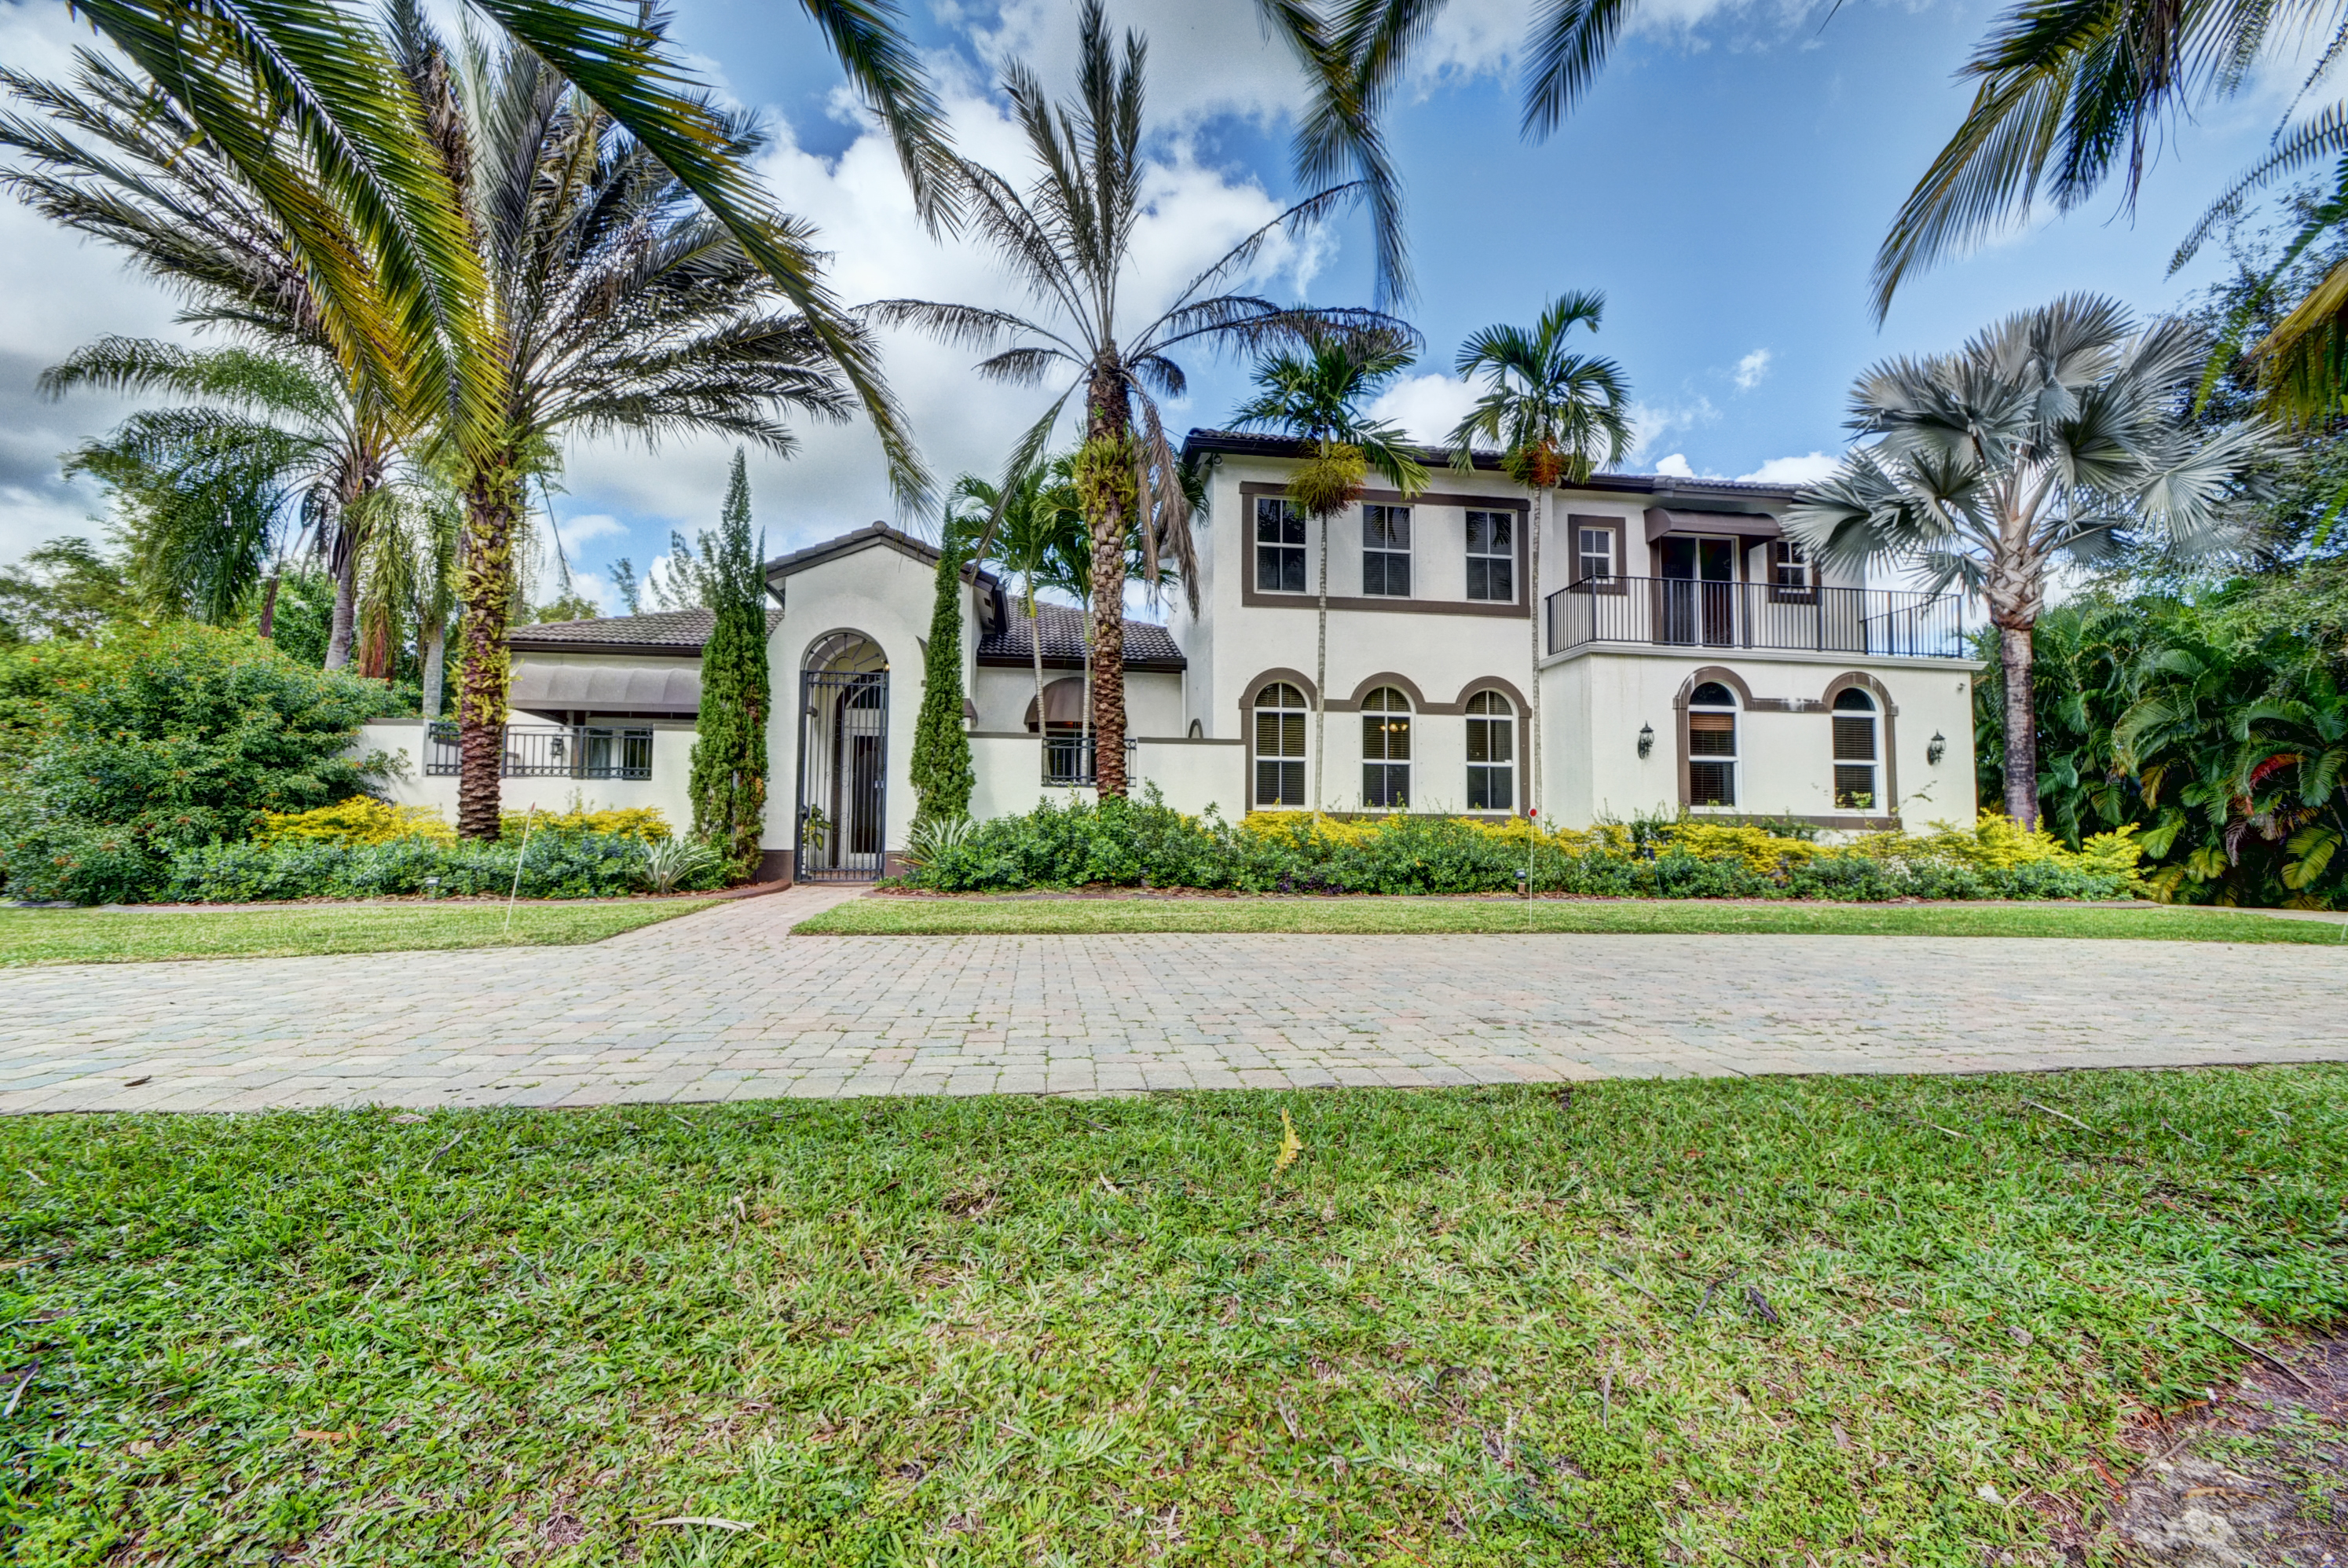 Coral Springs Real Estate Photography, Coral Springs Real Estate Photography